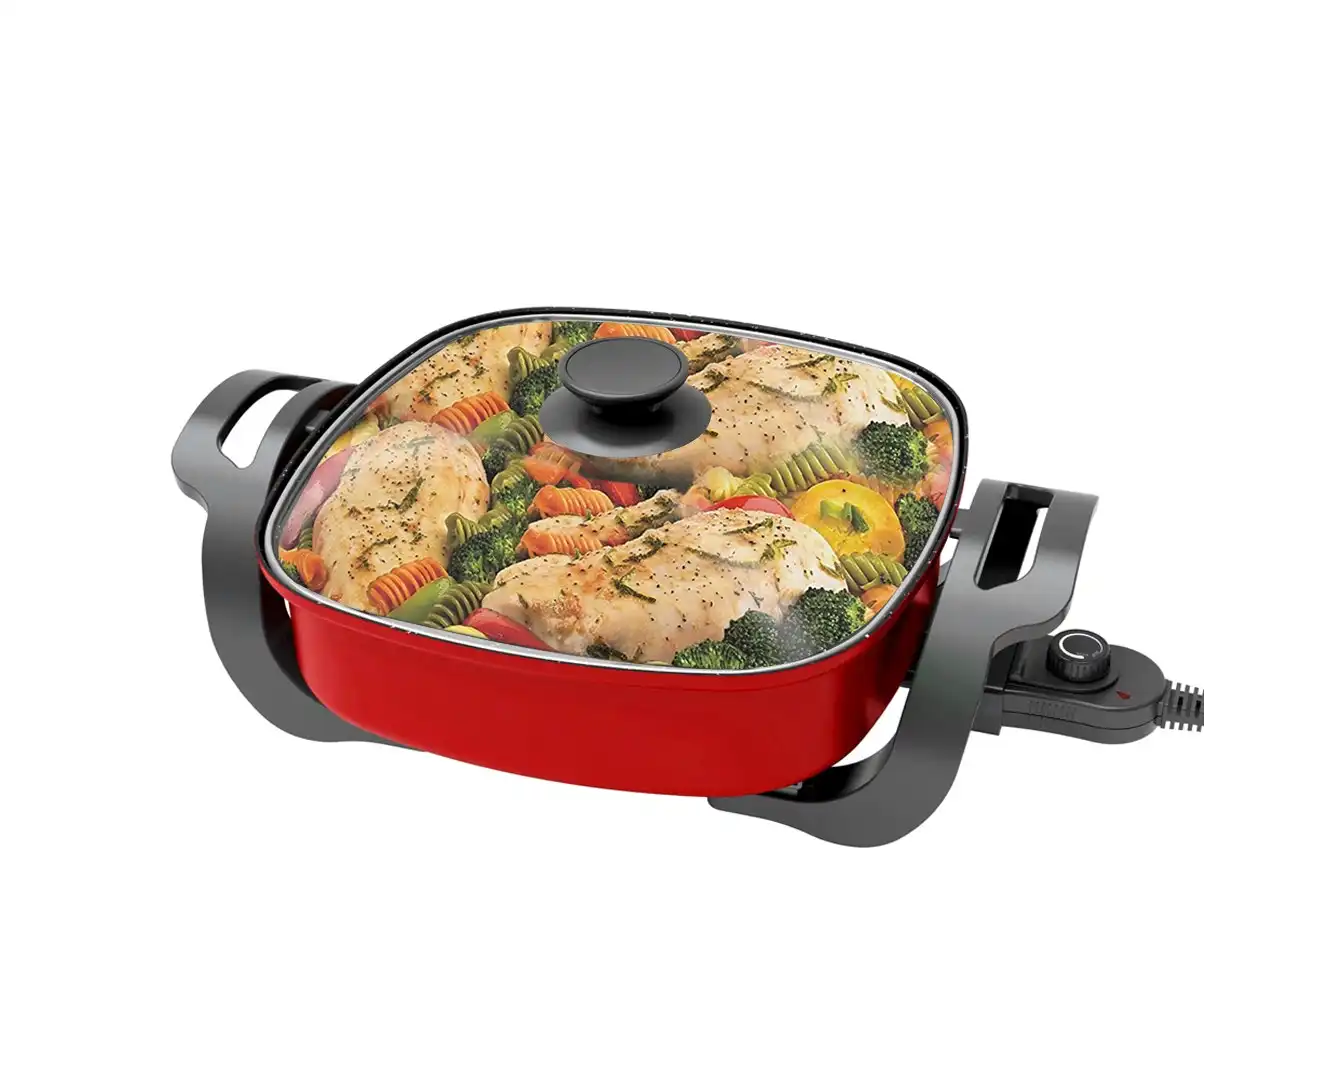 TODO 1500W Electric Frying Pan Skillet Multi Function Cooker Red Xj-12201